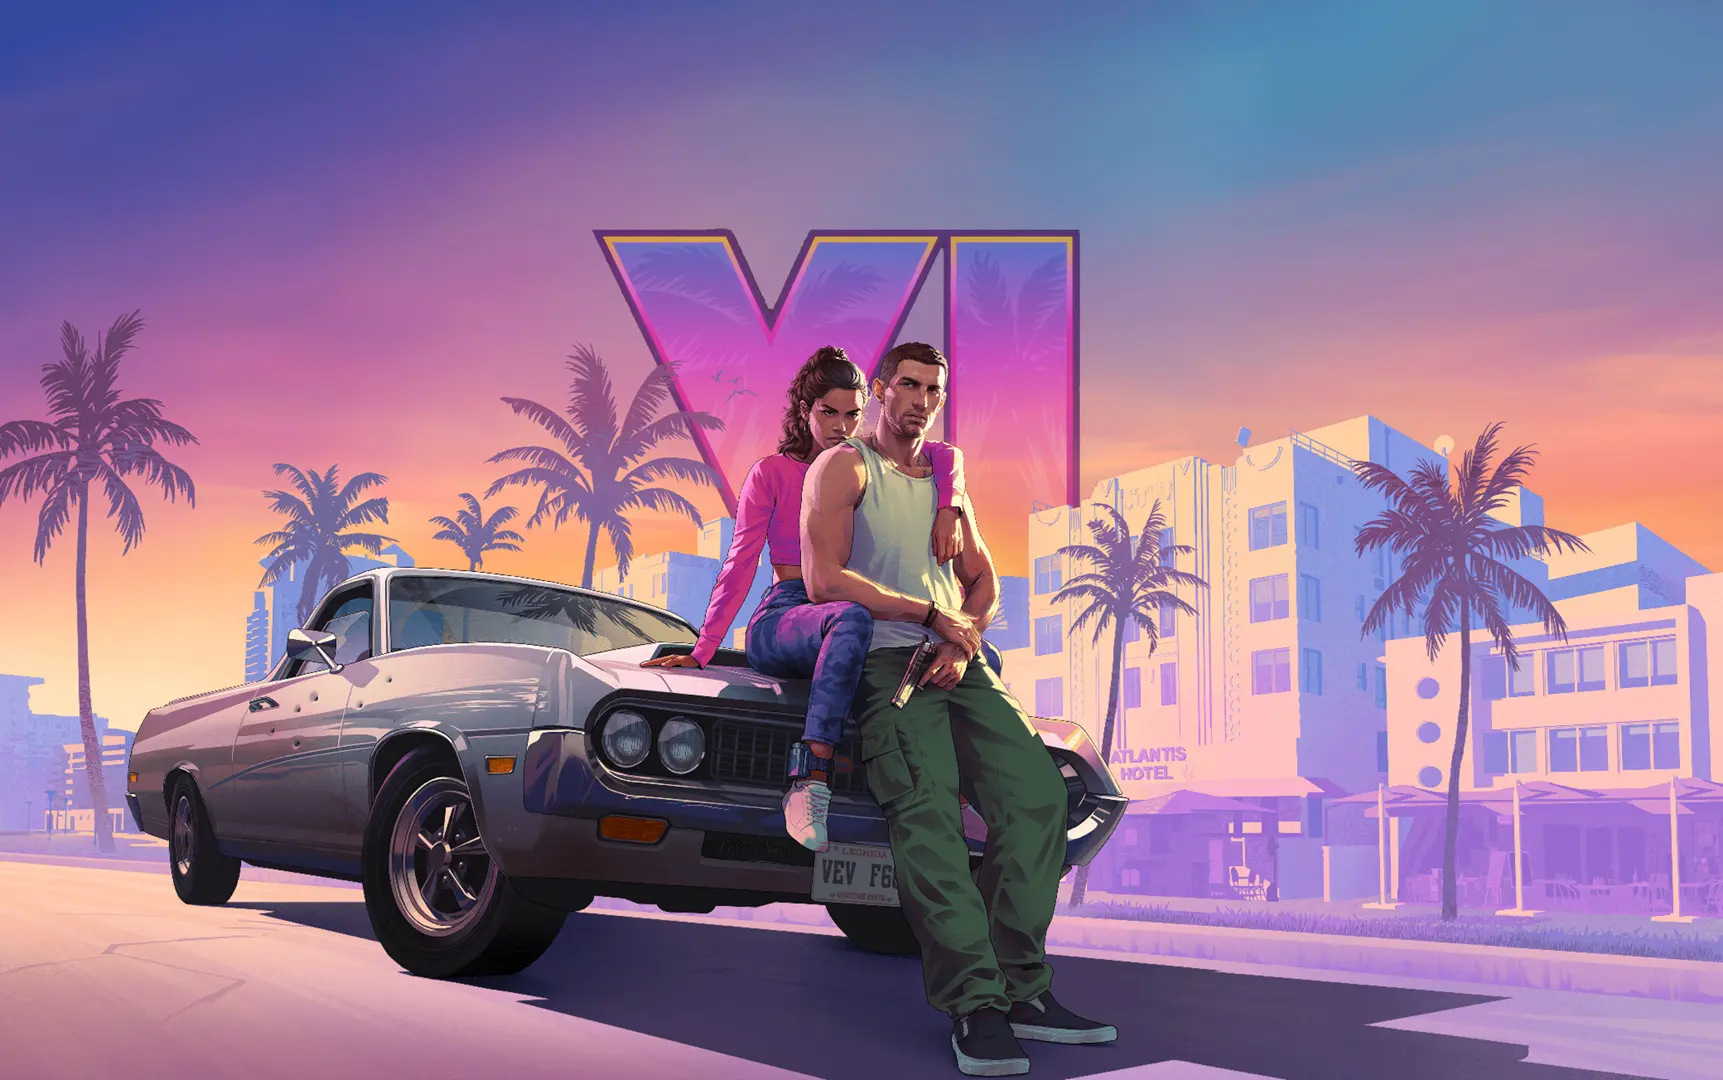 The official GTA 6 art featuring protagonists Jason and Lucia